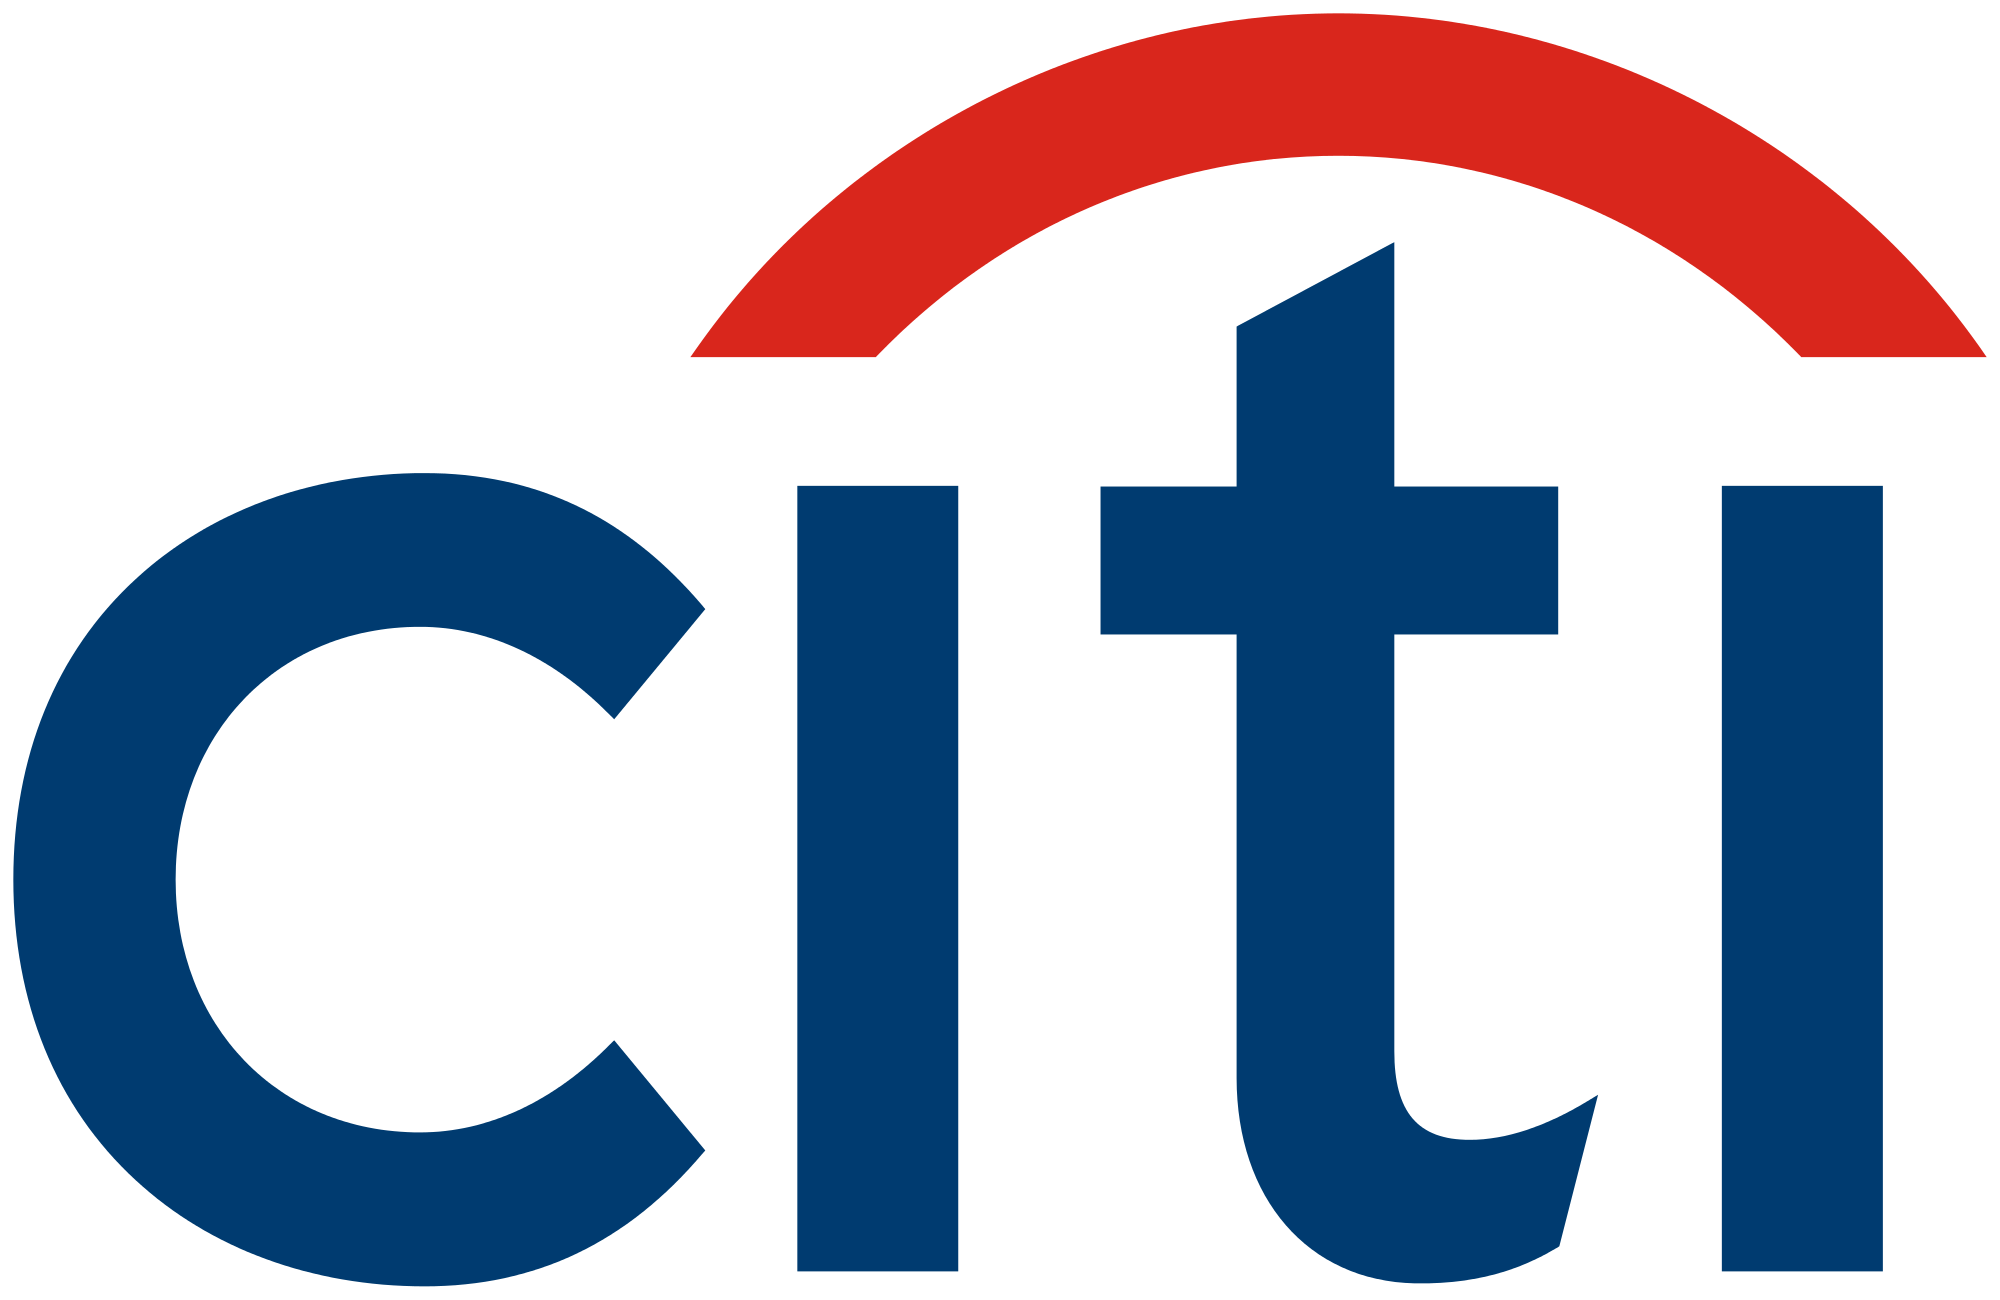 The specific options available to you for getting a Citi loan modification depend on whether or not Citi is the investor in your loan or the servicer of it.